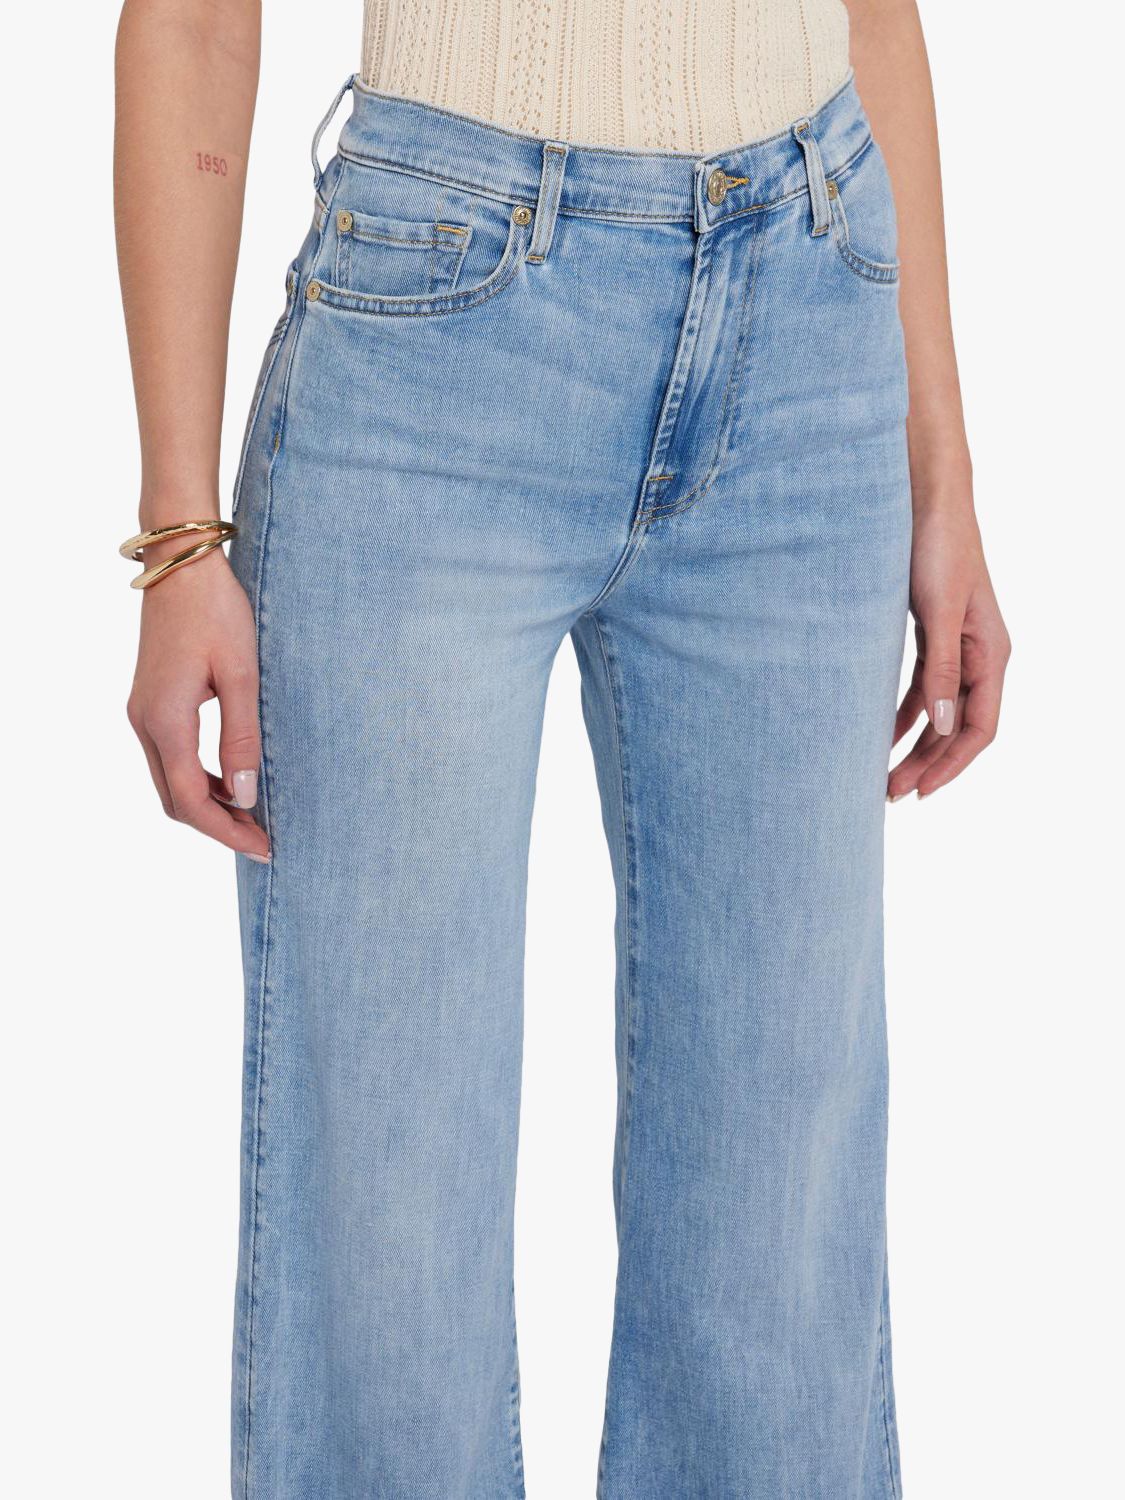 Buy Reiss Mid Blue Ameria Petite Palazzo Jeans from the Next UK online shop